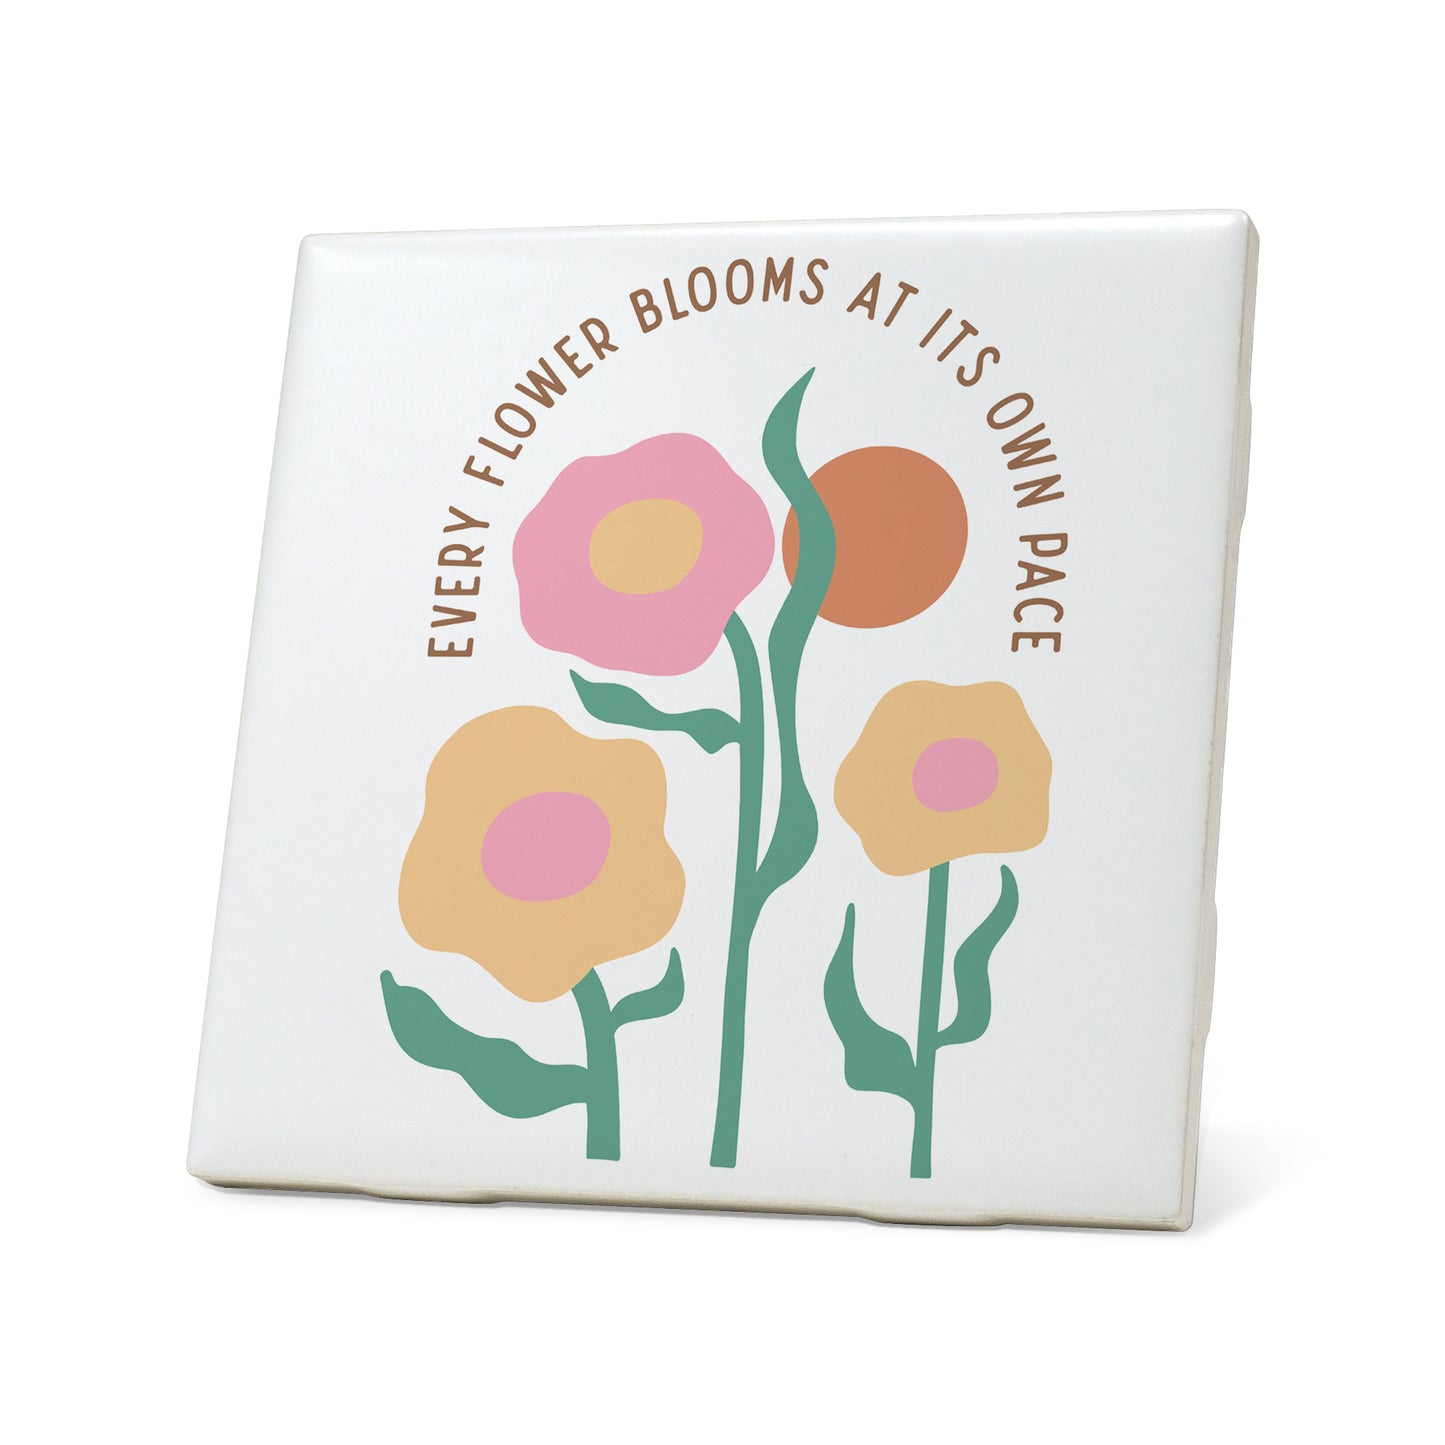 Blooms at it's own pace boho Graphic Coasters